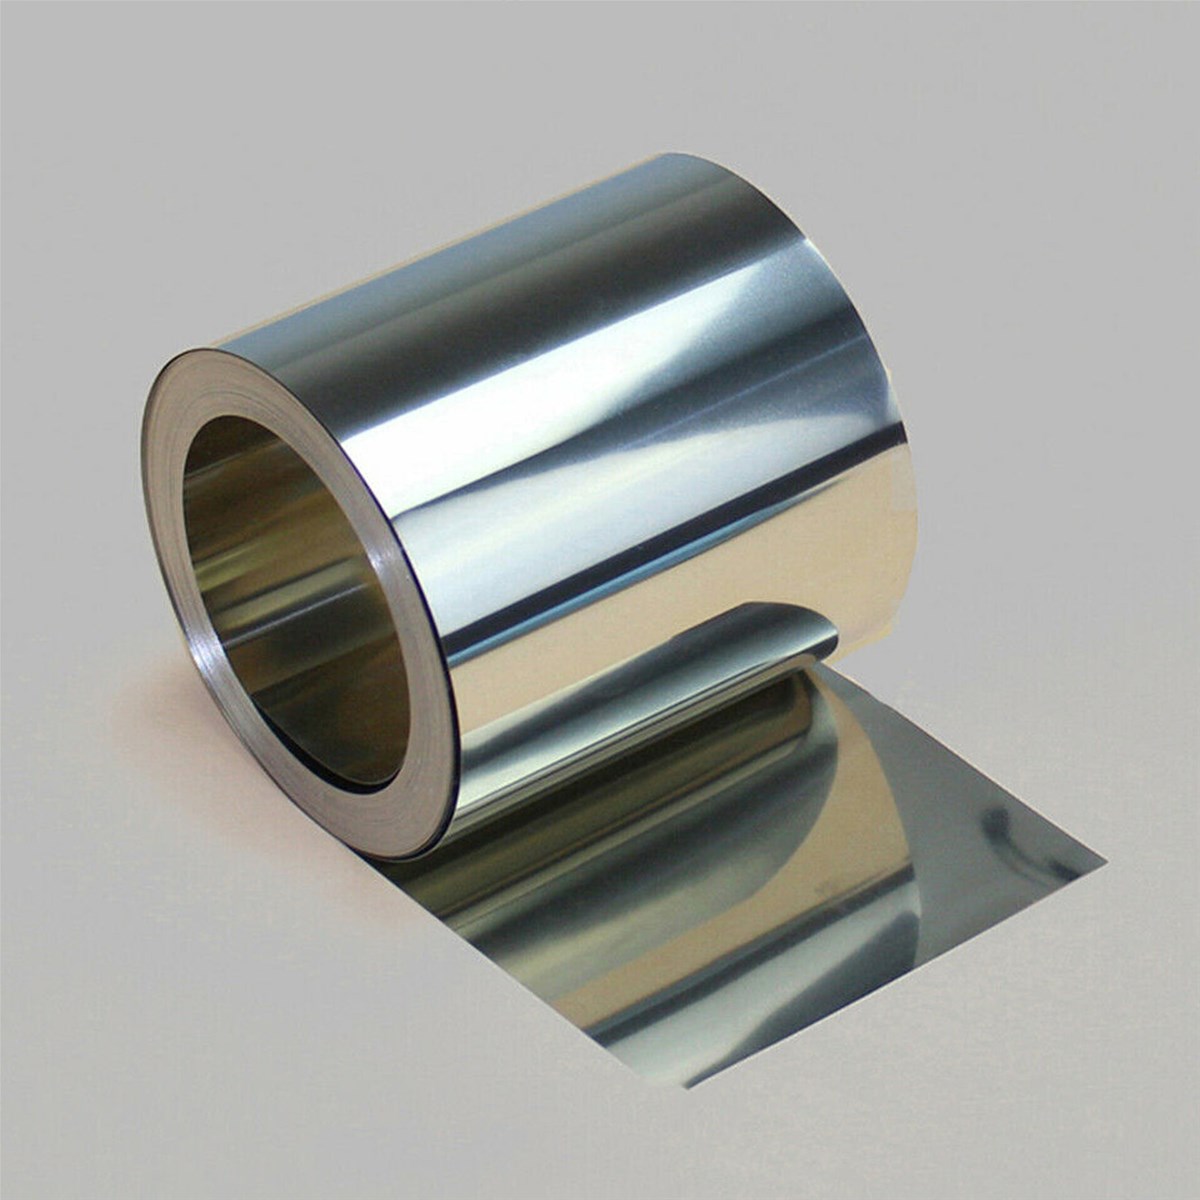 Newest Stainless Steel Sheet Silver 304 Stainless Steel Fine Plate Sheet Foil 001008mm100mm1000mm